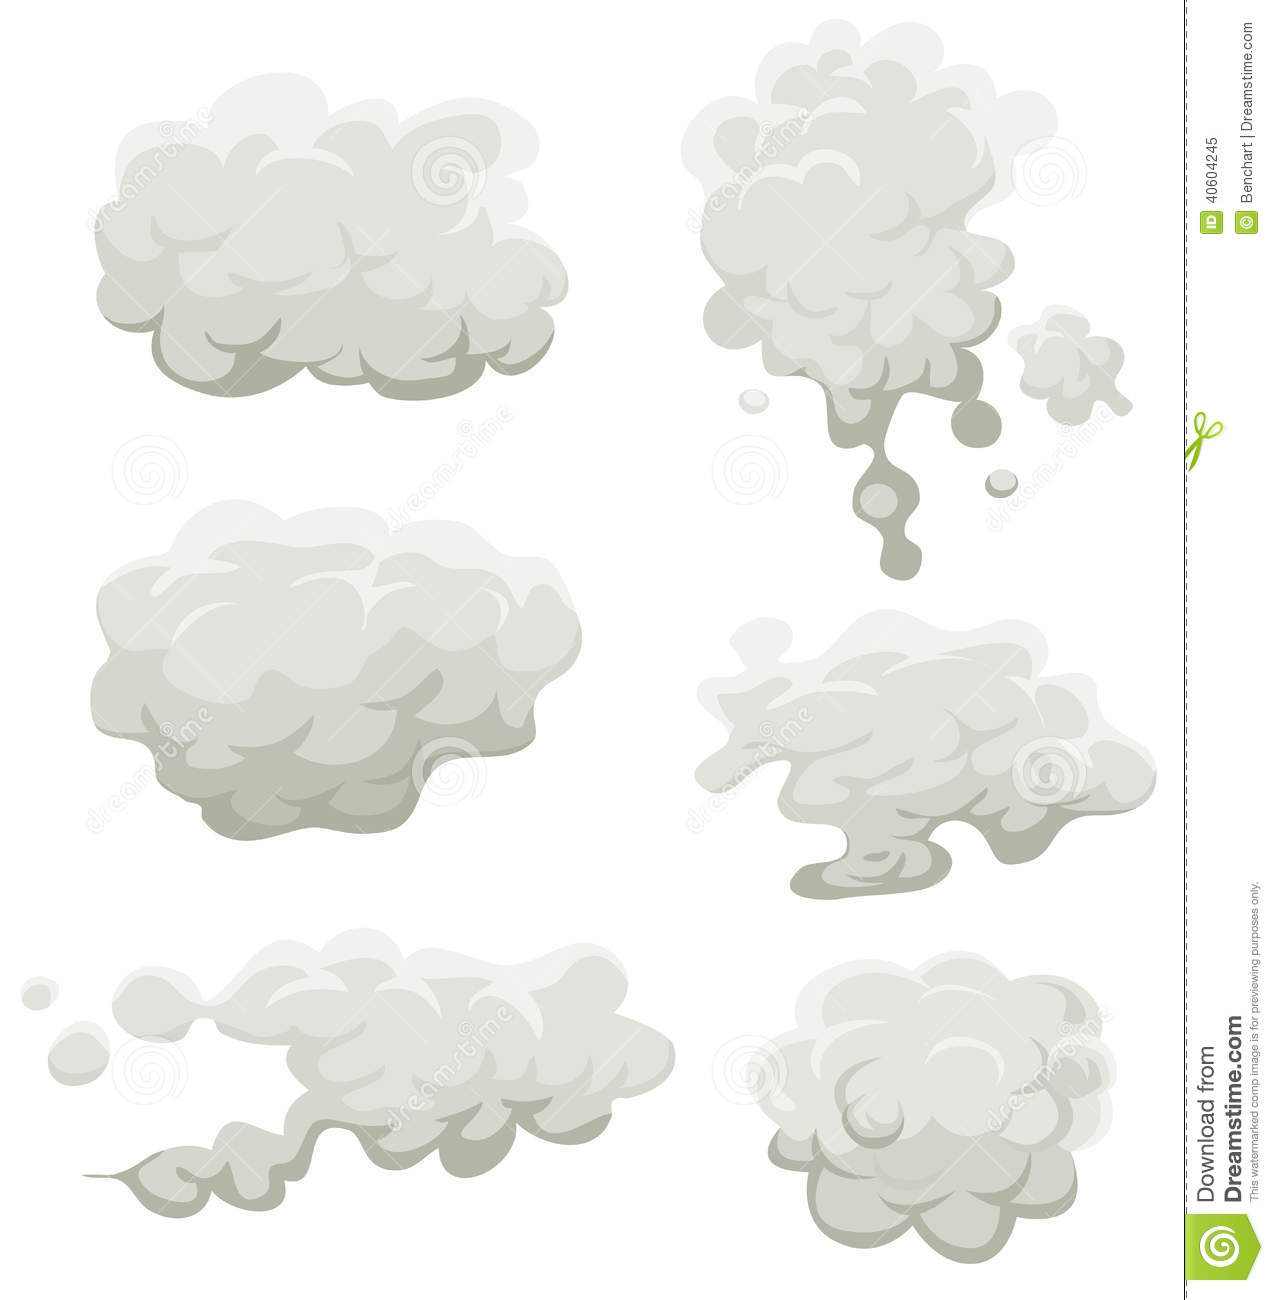 Illustration Of A Set Of Cartoon Clouds Smoke Patterns And Fog Icons